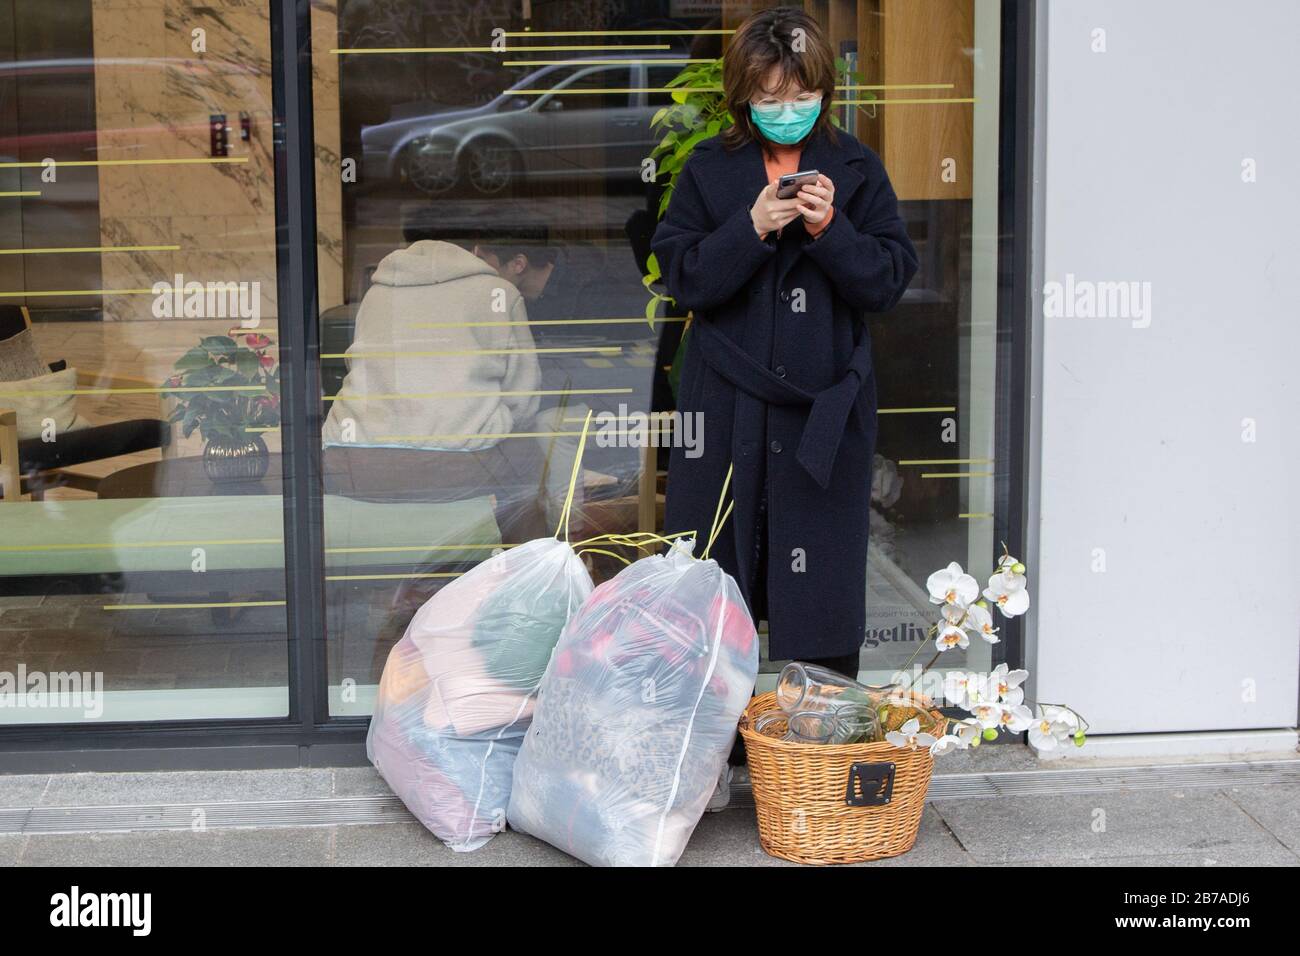 London UK 14th March 2020 A Woman wearing a mouth mask to protect herself during the Coronavirus outbreak in London. Credit: Thabo Jaiyesimi/Alamy Live News Credit: Thabo Jaiyesimi/Alamy Live News Stock Photo